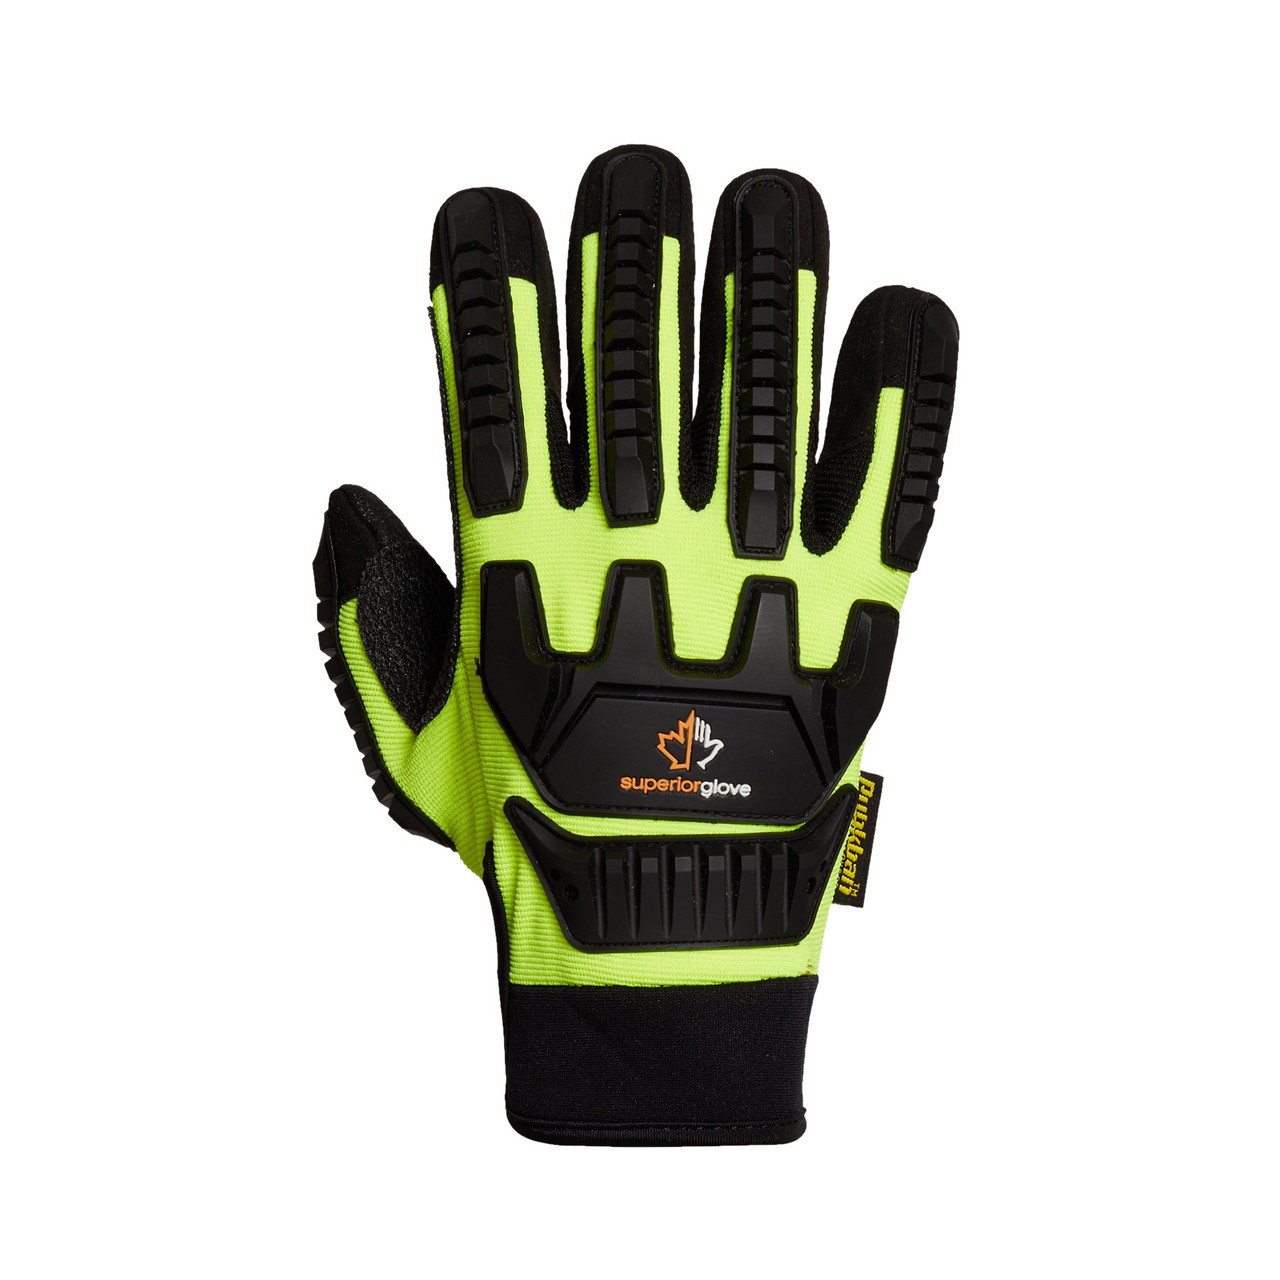 Superior Glove Dexterity® Anti-Impact Cut-Resistant Glove with